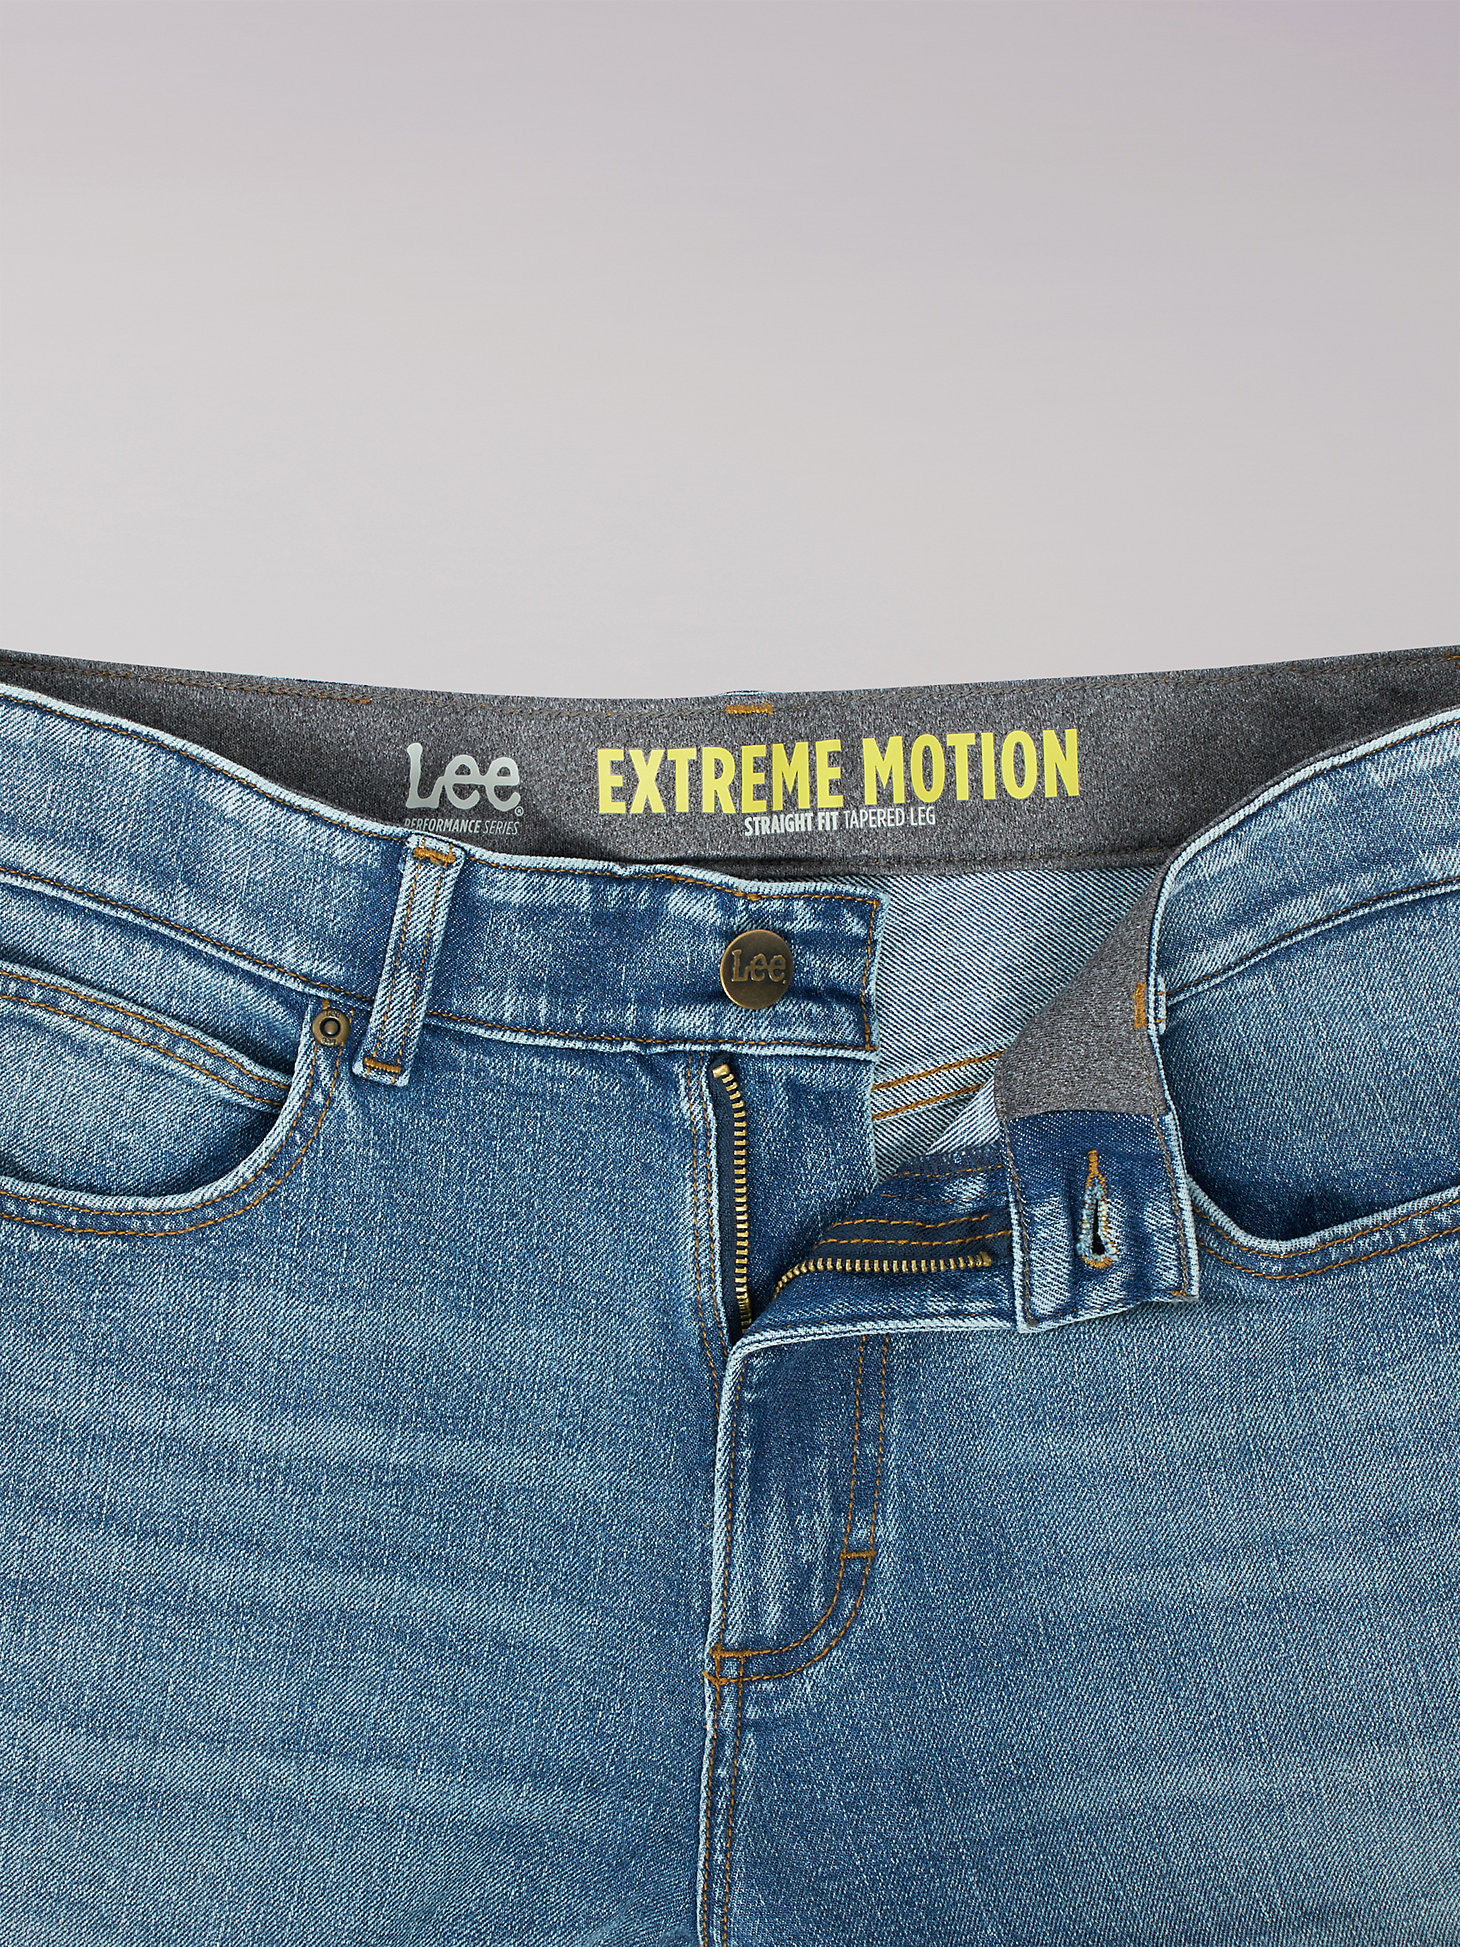 Men's Extreme Motion 4-Way Stretch Straight Tapered Jean in Muzzy alternative view 6